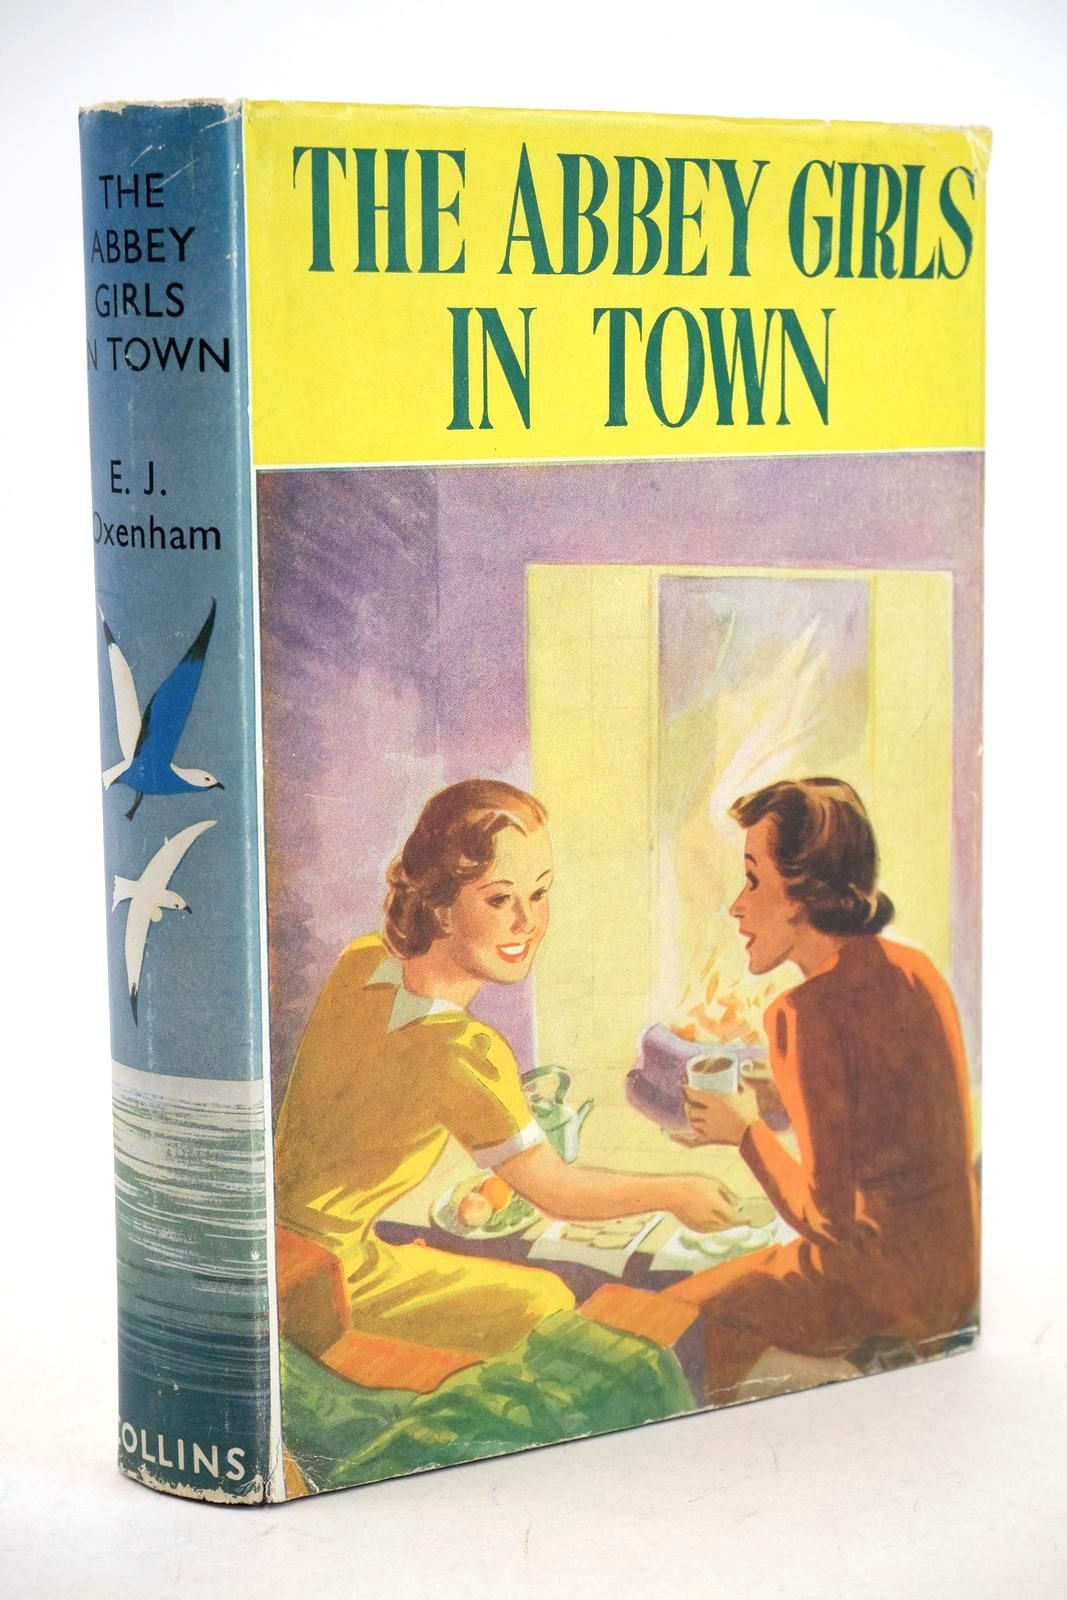 Photo of THE ABBEY GIRLS IN TOWN written by Oxenham, Elsie J. published by Collins (STOCK CODE: 1326844)  for sale by Stella & Rose's Books